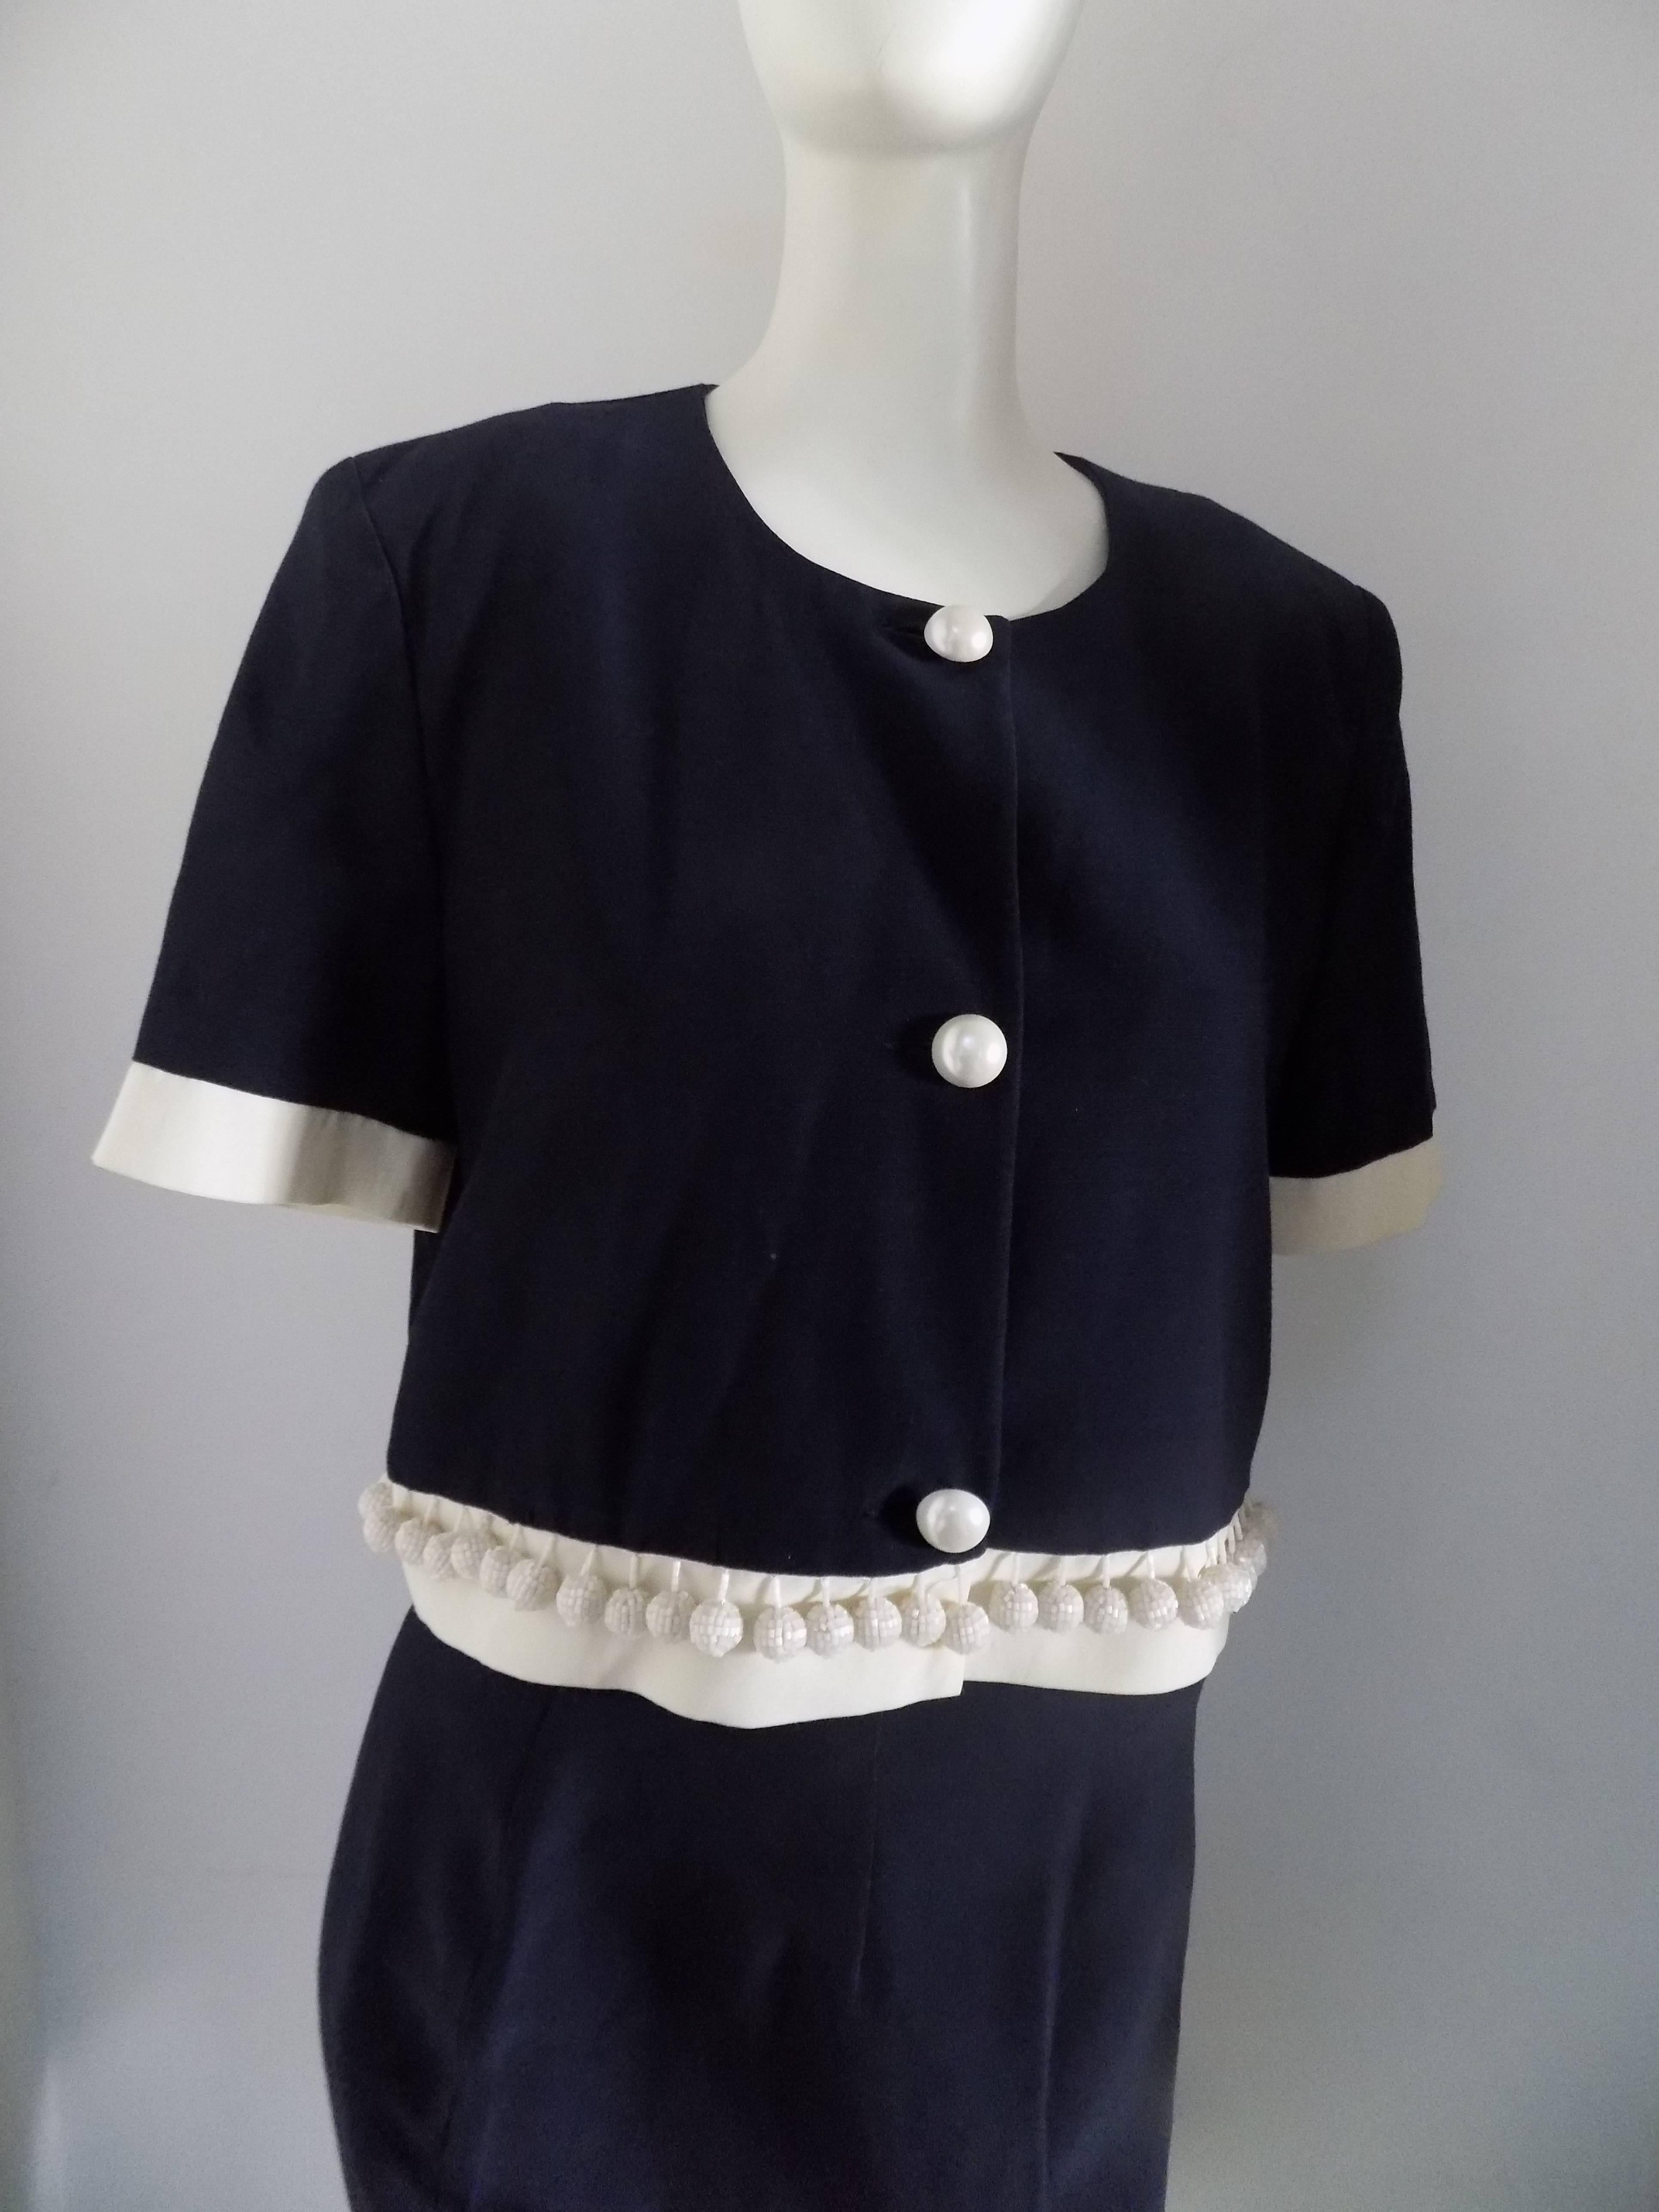 Saké blu and white skirt suit
Totally made in italy in italian size range 44